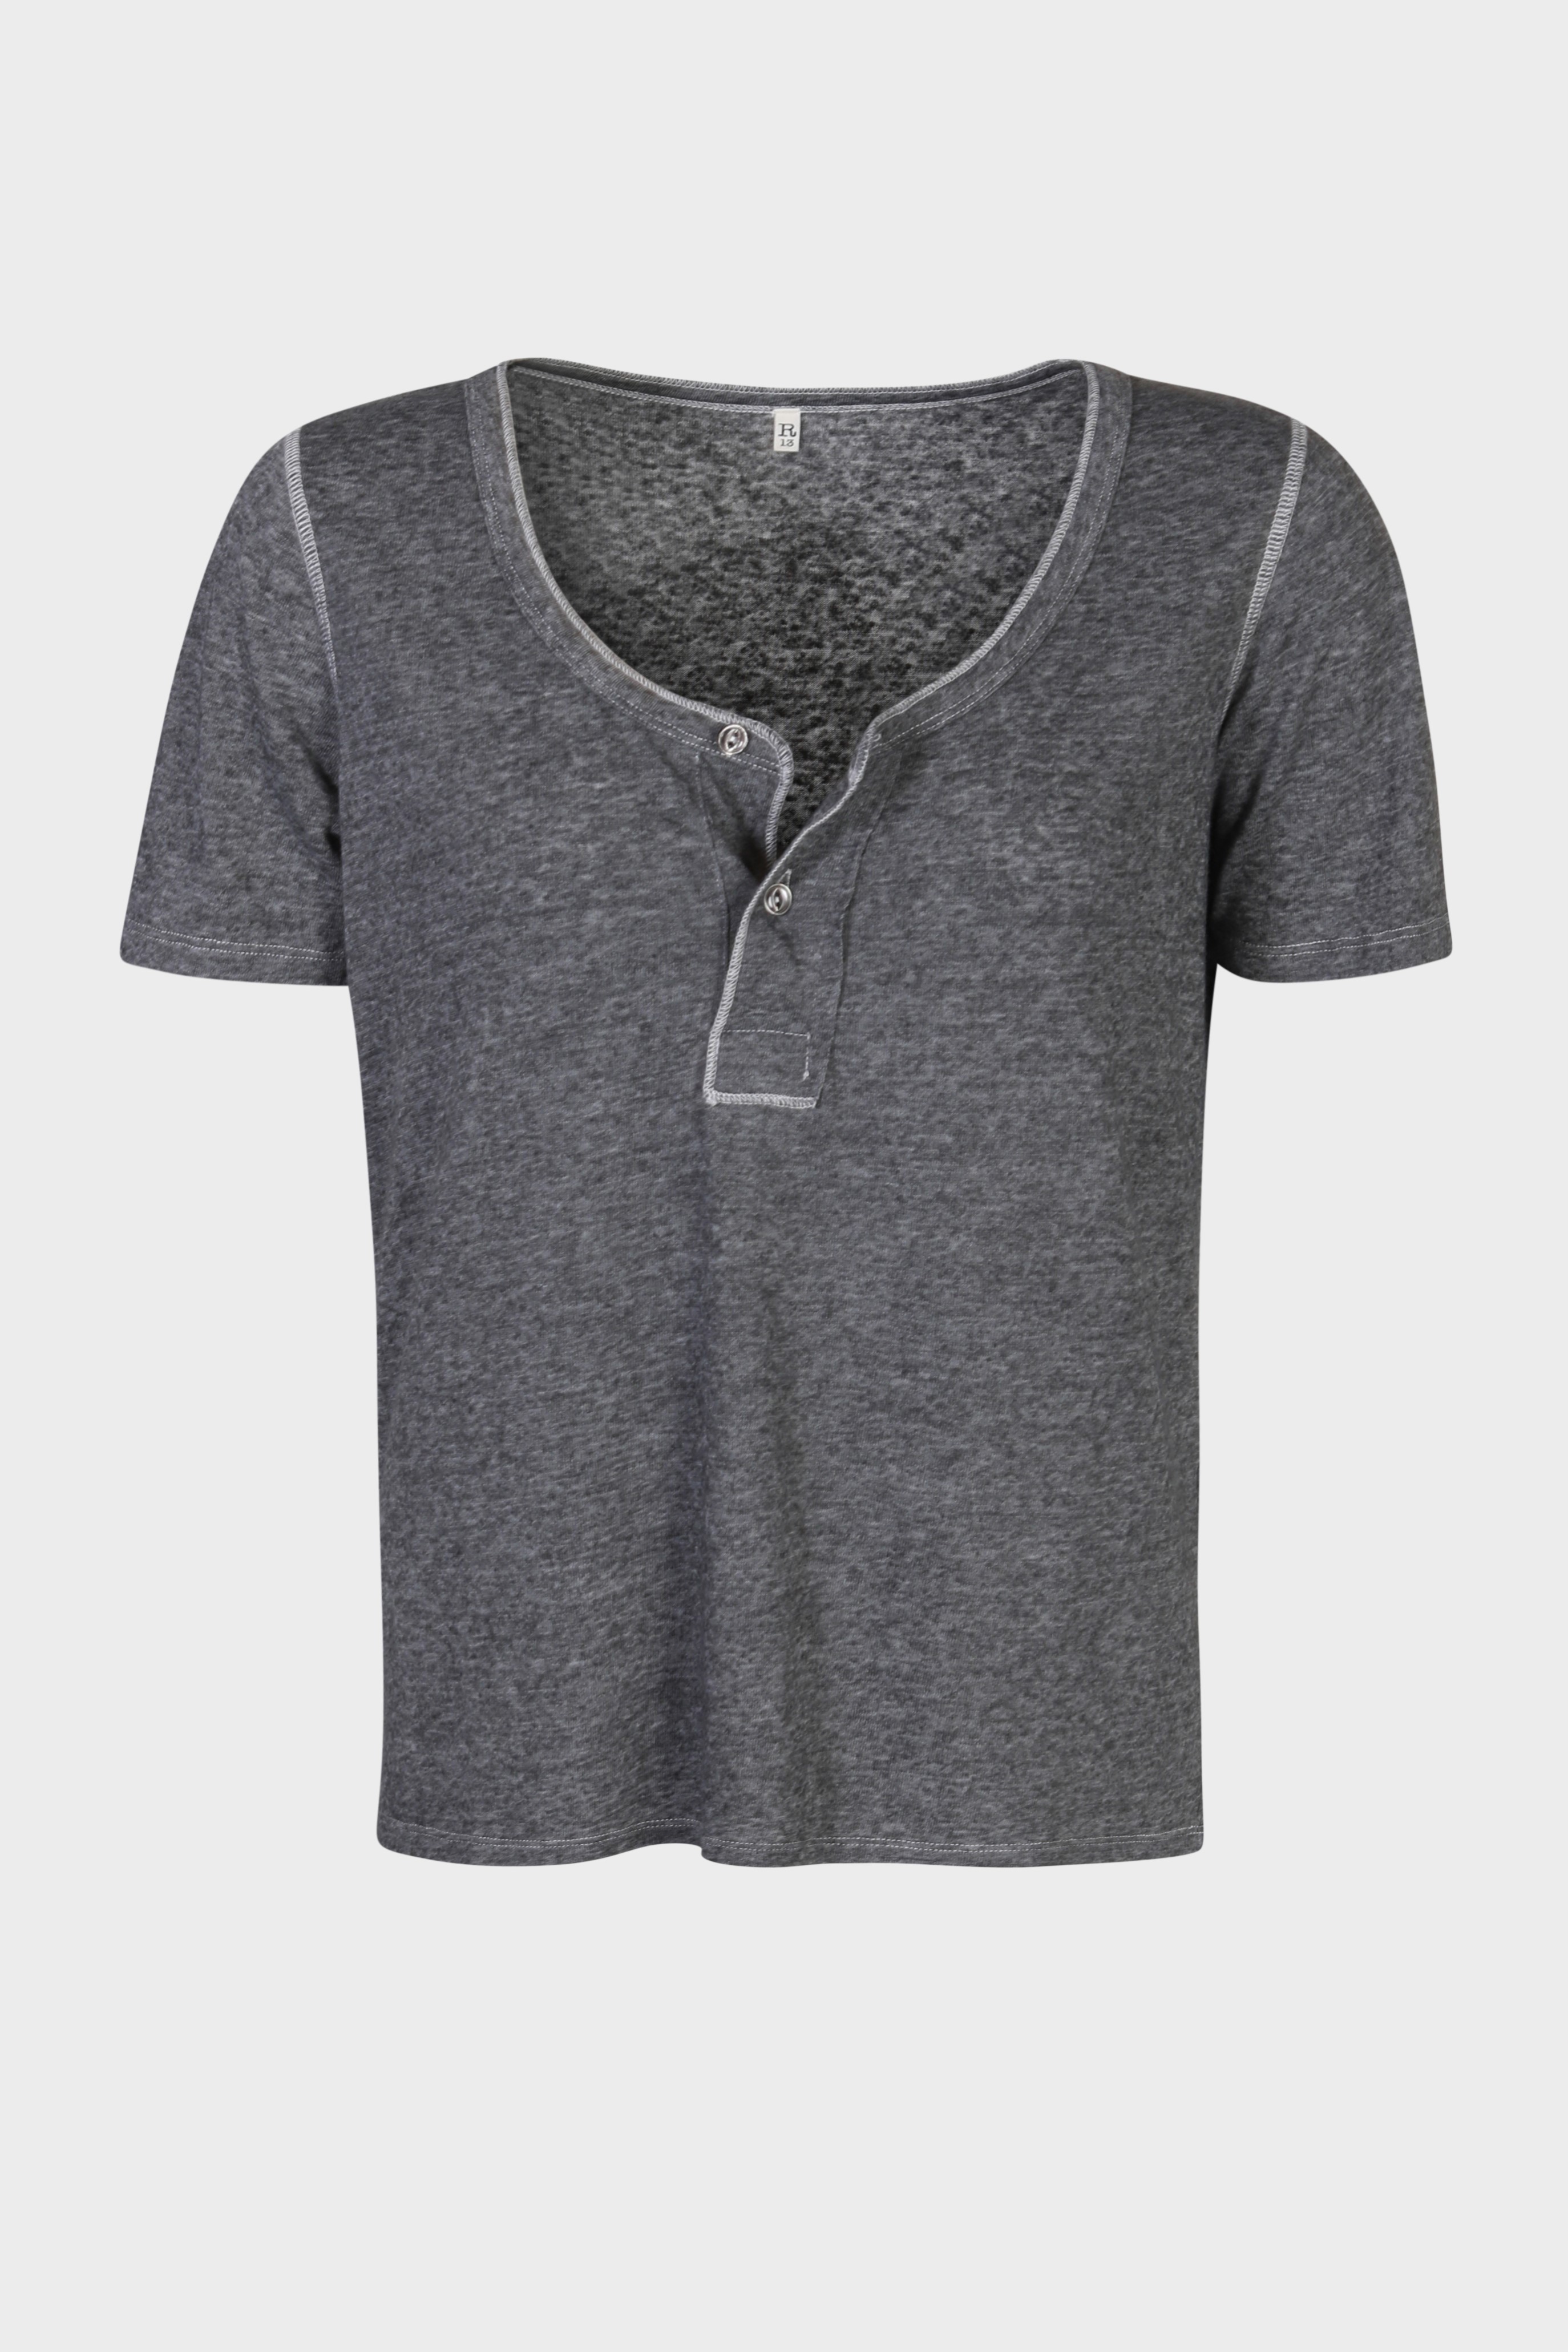 R13 Low Neck Henley Tee in Charcoal XS